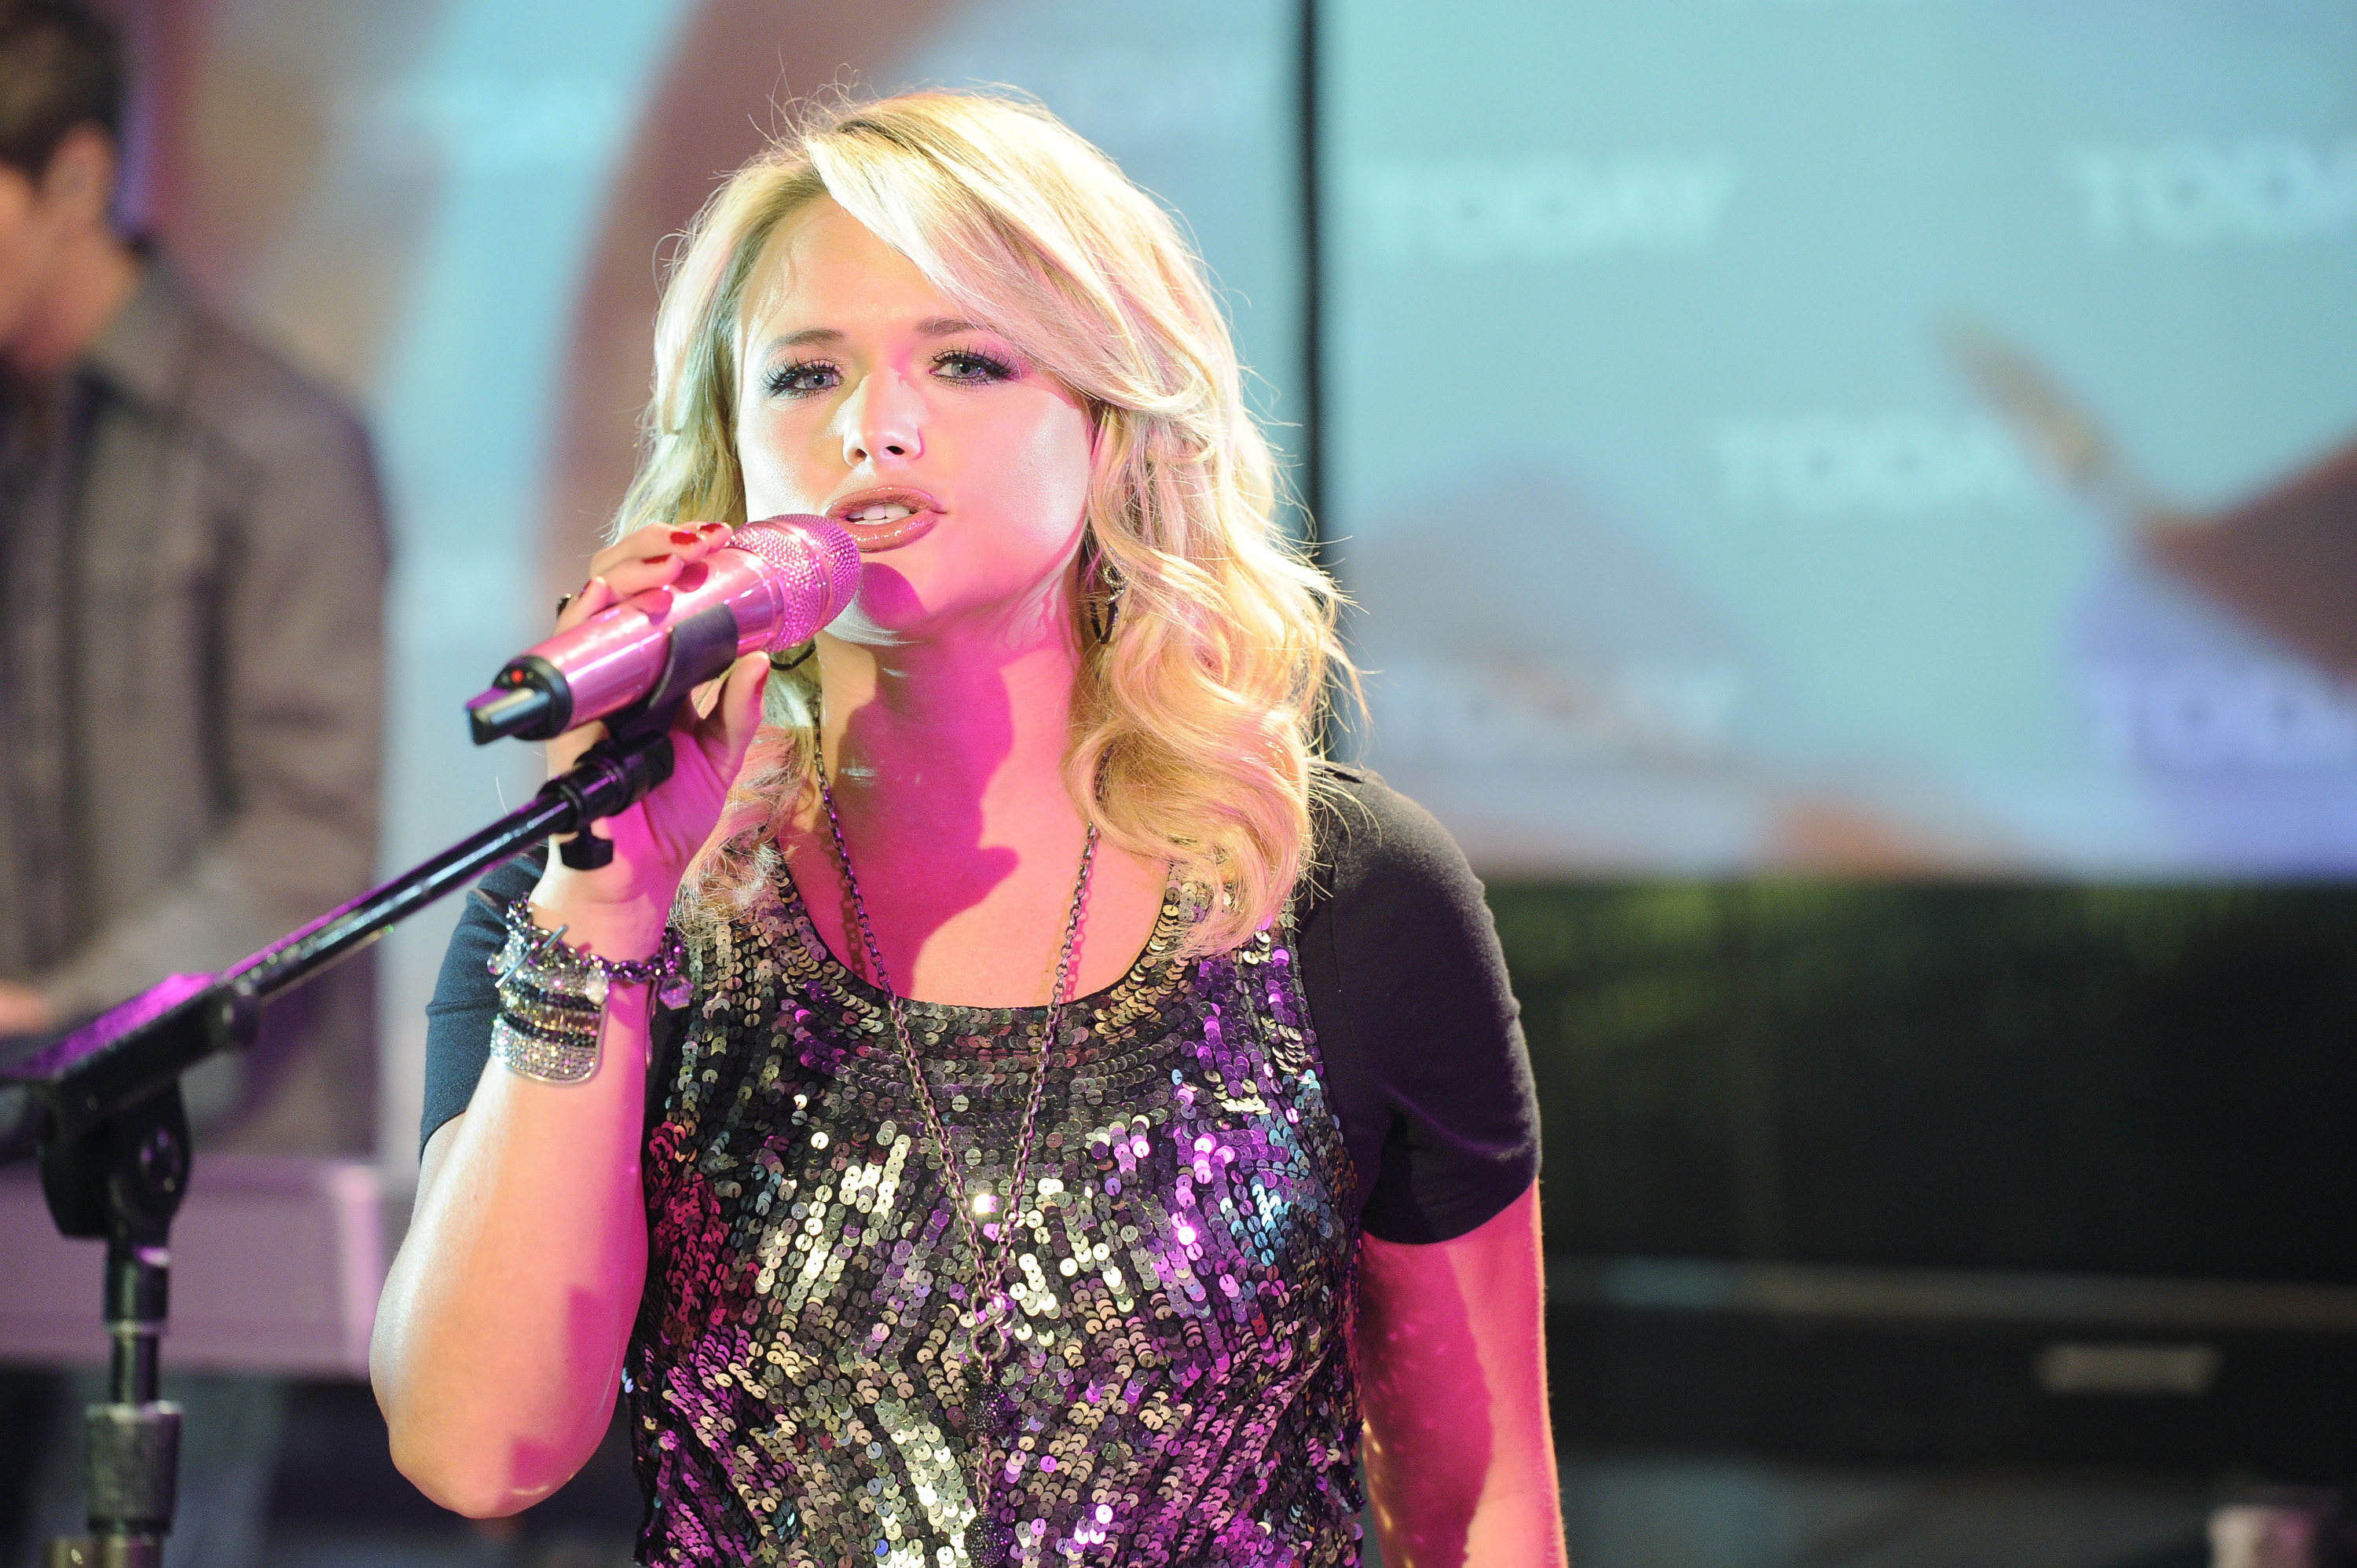 Miranda Lambert performs on the "Today" show on November 1, 2011 | Source: Getty Images